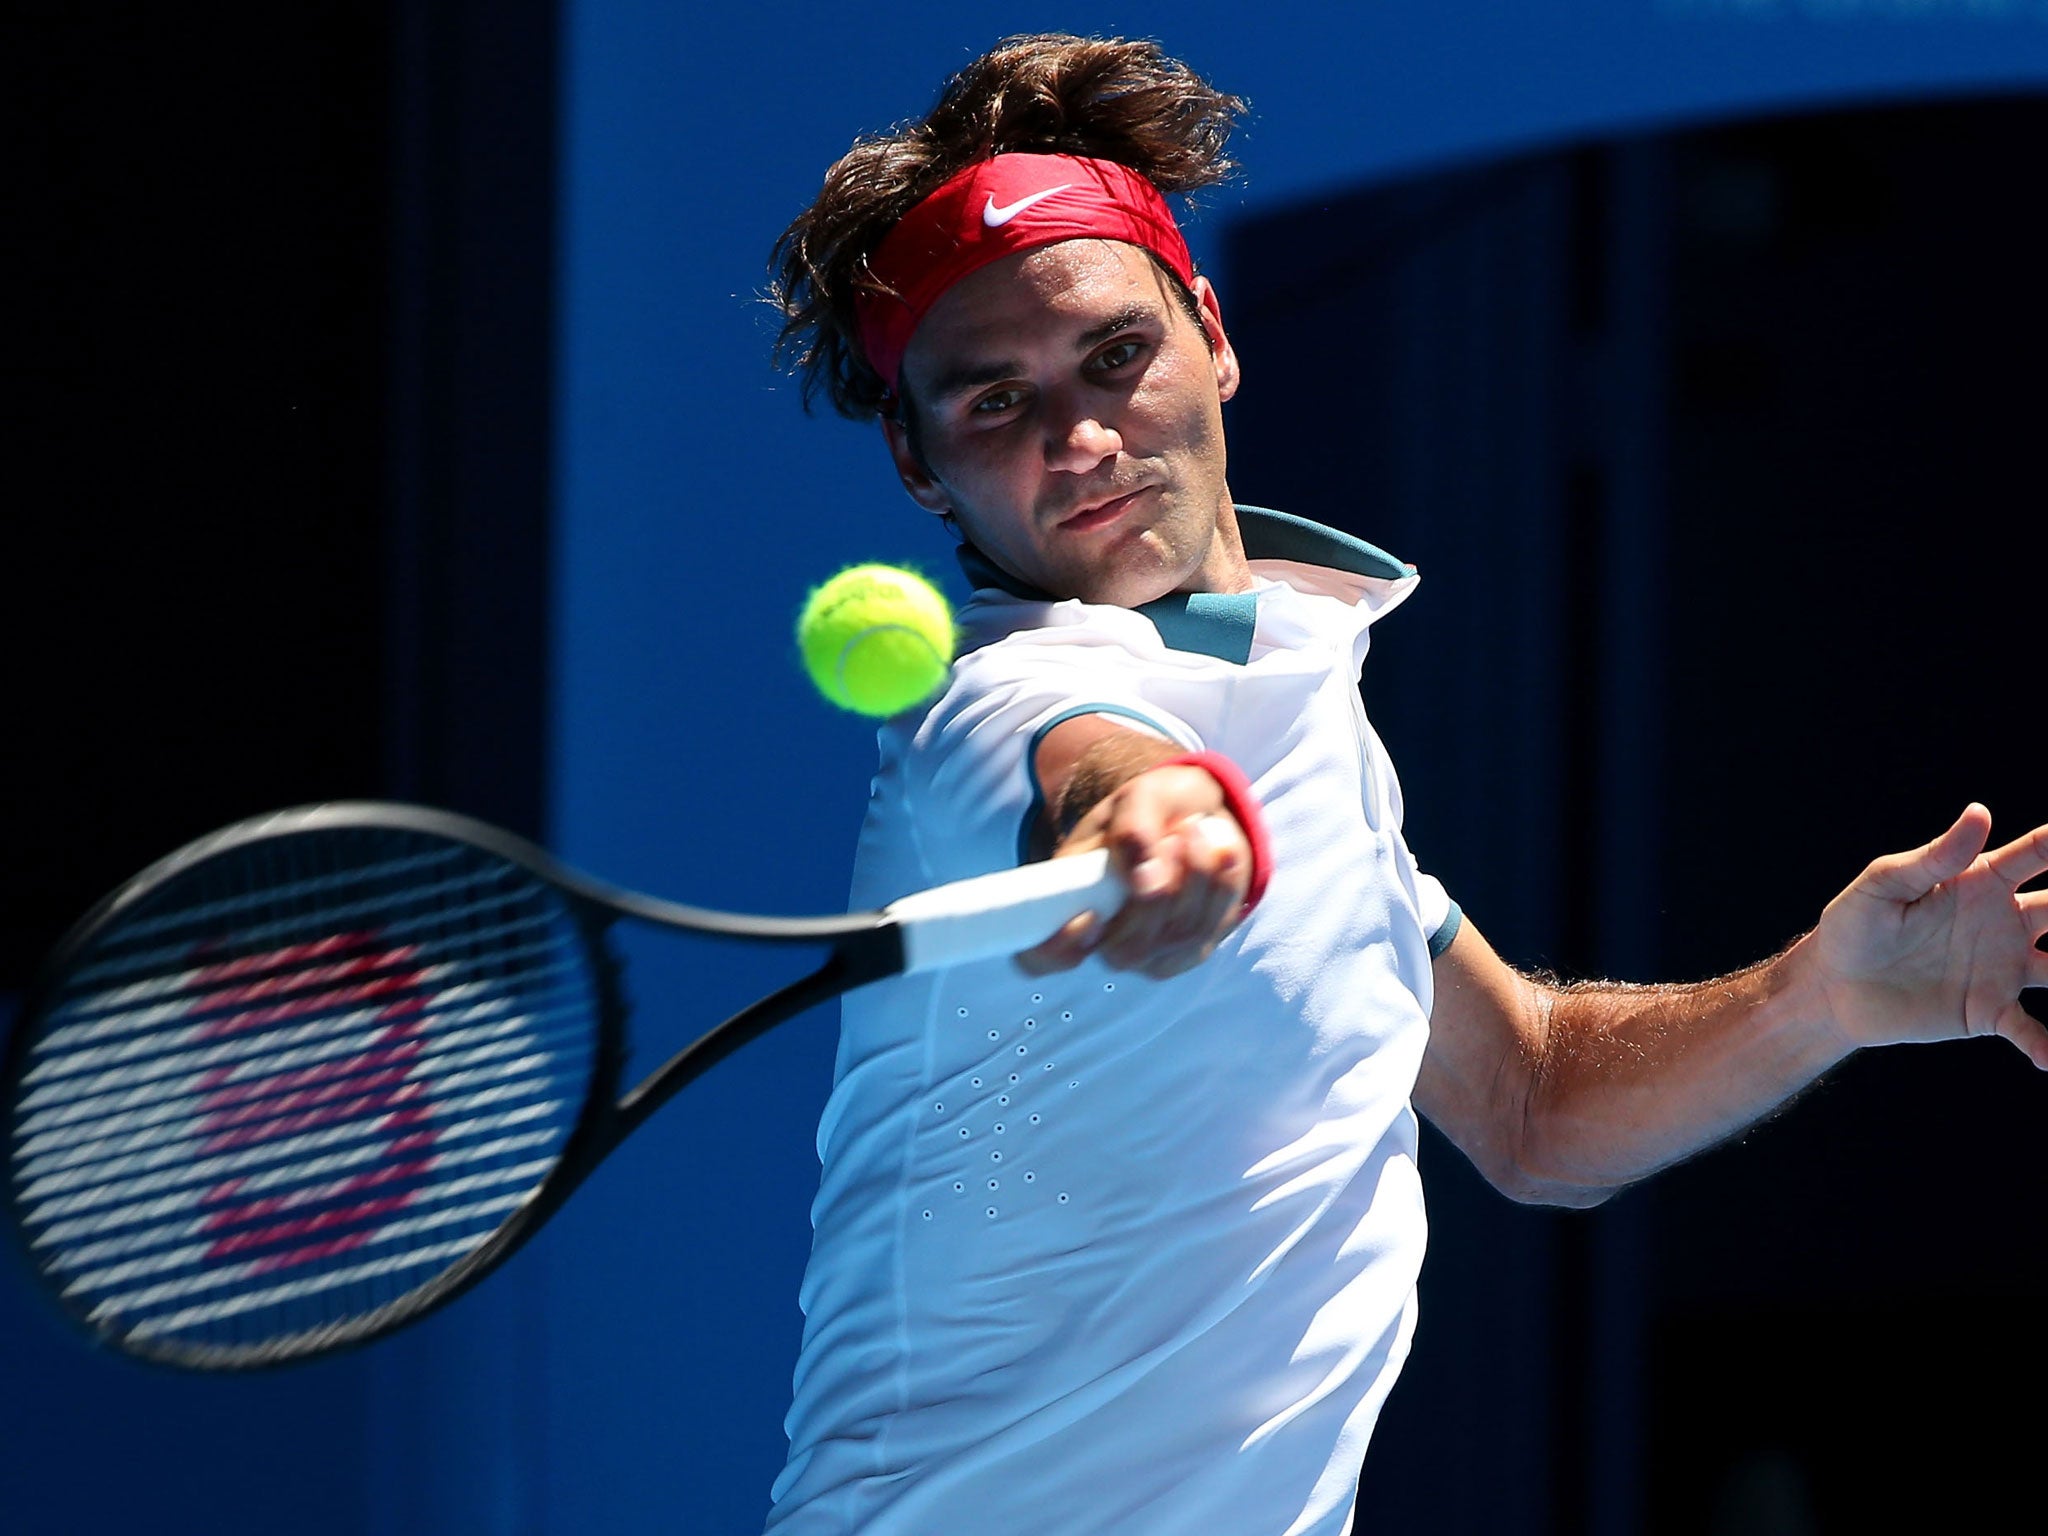 Roger Federer eased into the second round of the Australian Open via a 6-4 6-4 6-2 victory over Australian wildcard James Duckworth